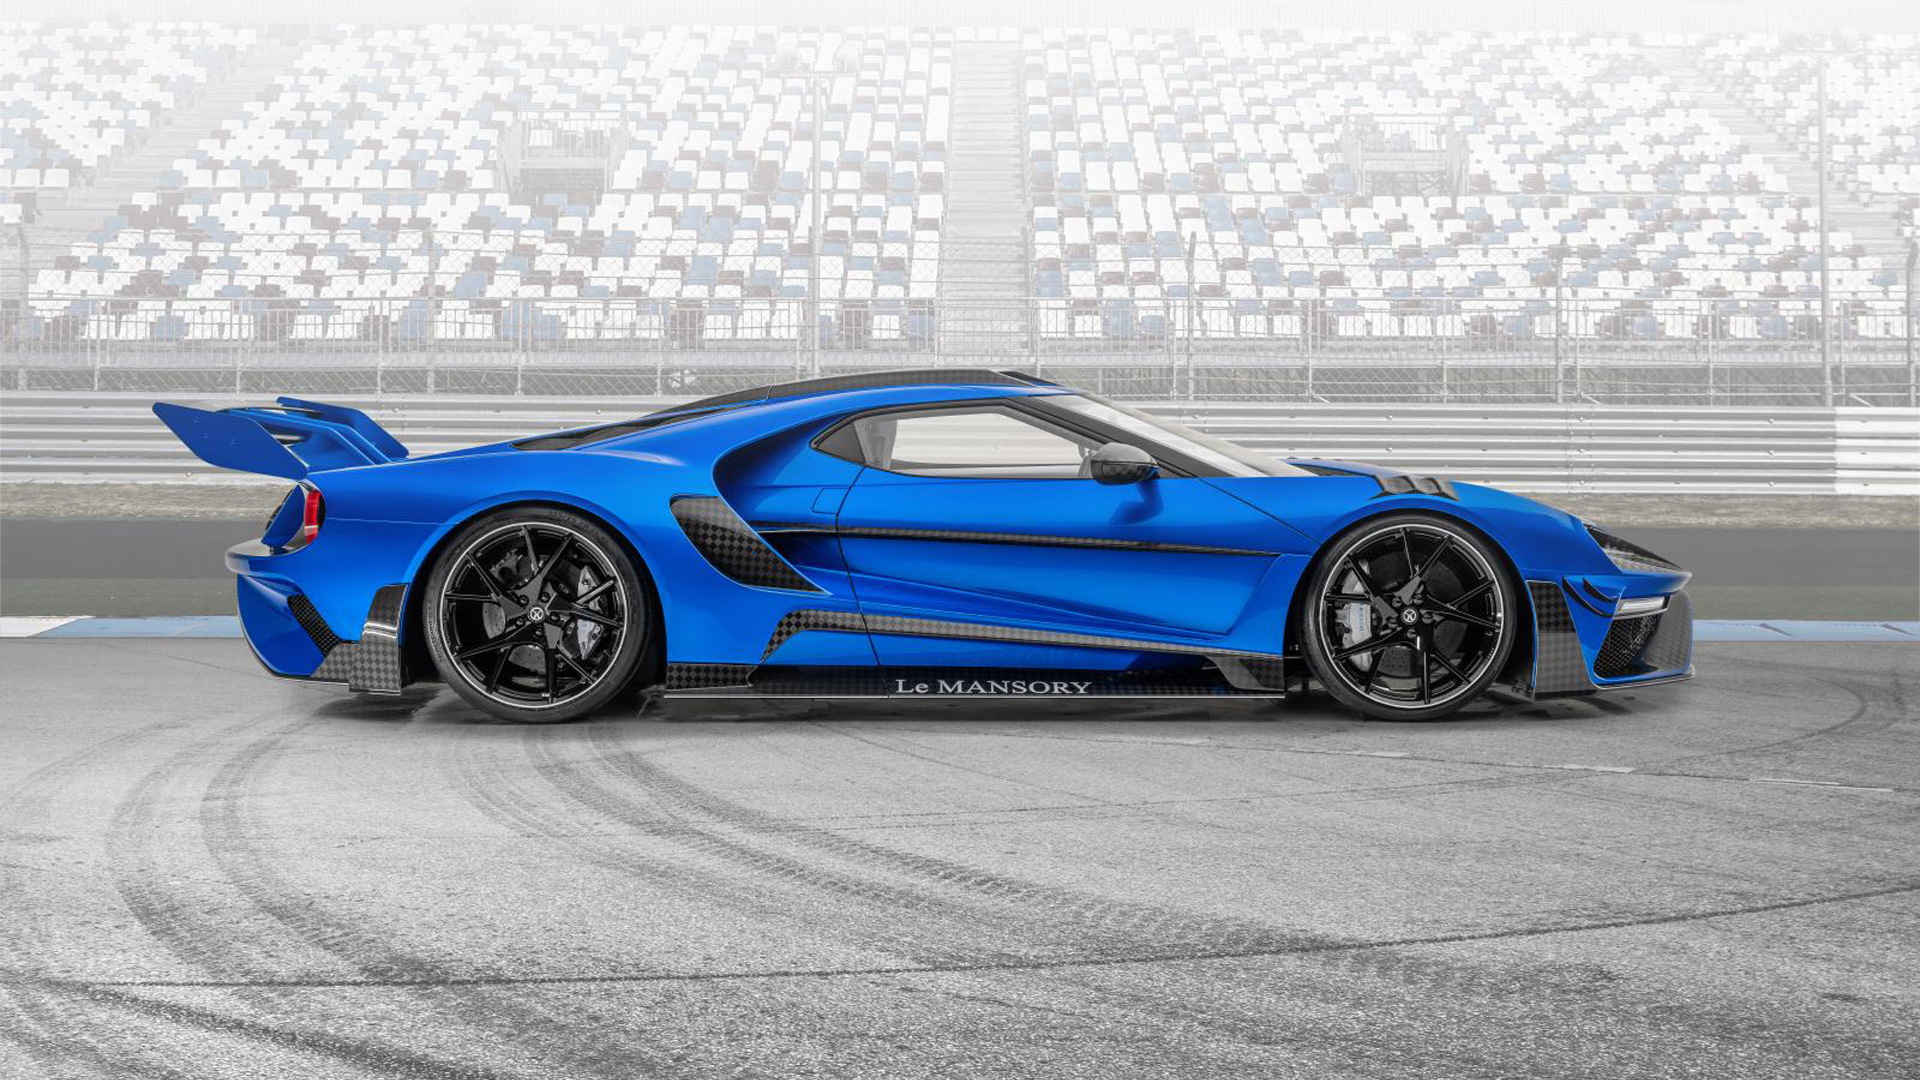 Mansory LeMansory based on the Ford GT